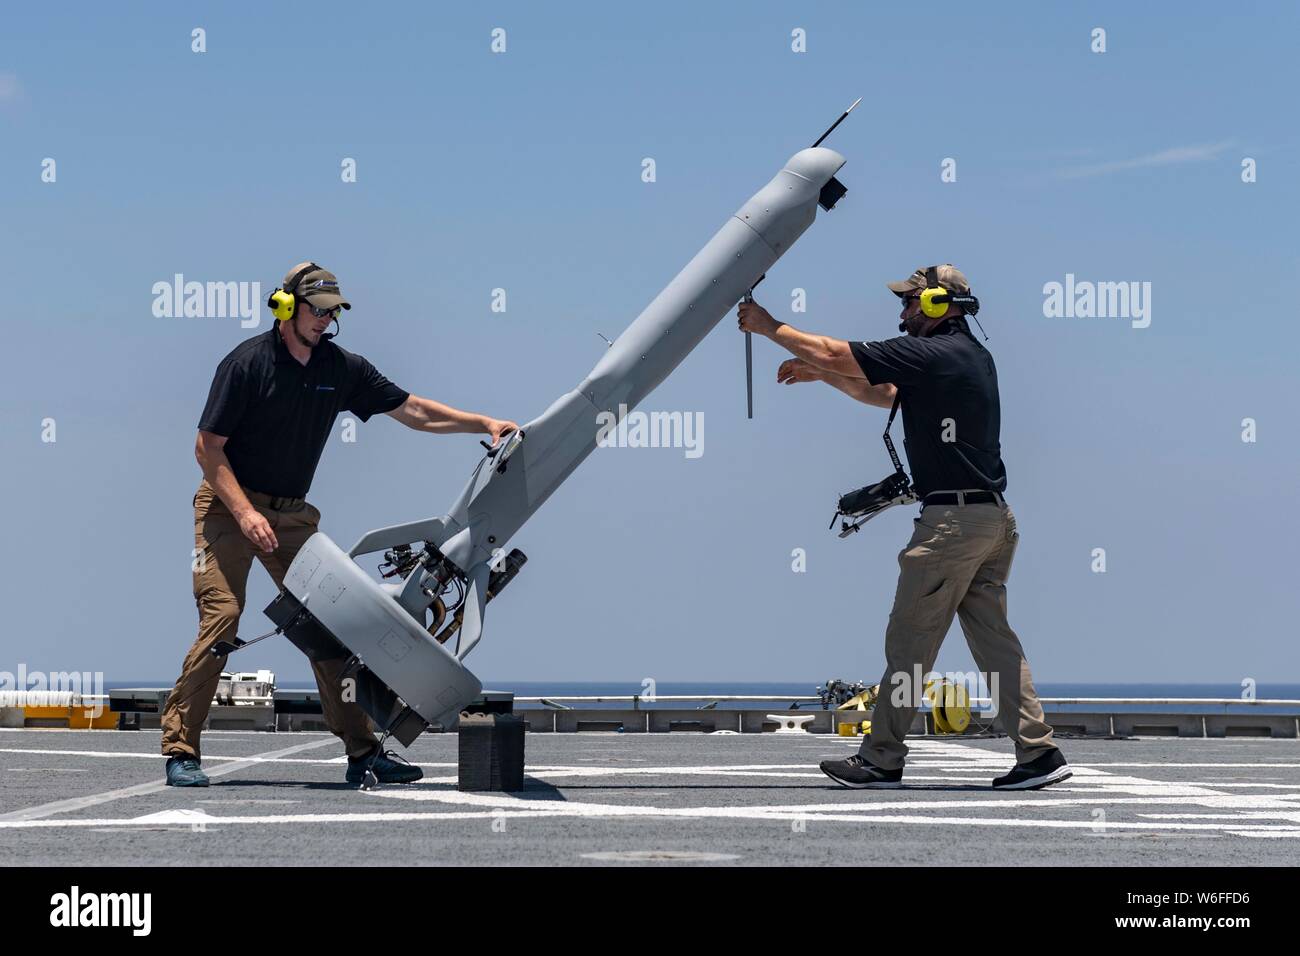 A U.S. Navy VBAT vertical take-off and landing unmanned aerial system drone prepares to launch from the flight deck of the Military Sealift Command expeditionary fast transport vessel USNS Spearhead July 24, 2019 in the Atlantic Ocean off the coast of Florida. The VBAT UAS provides improved detection and monitoring to support counter-narcotics missions in the Caribbean and Eastern Pacific. Stock Photo